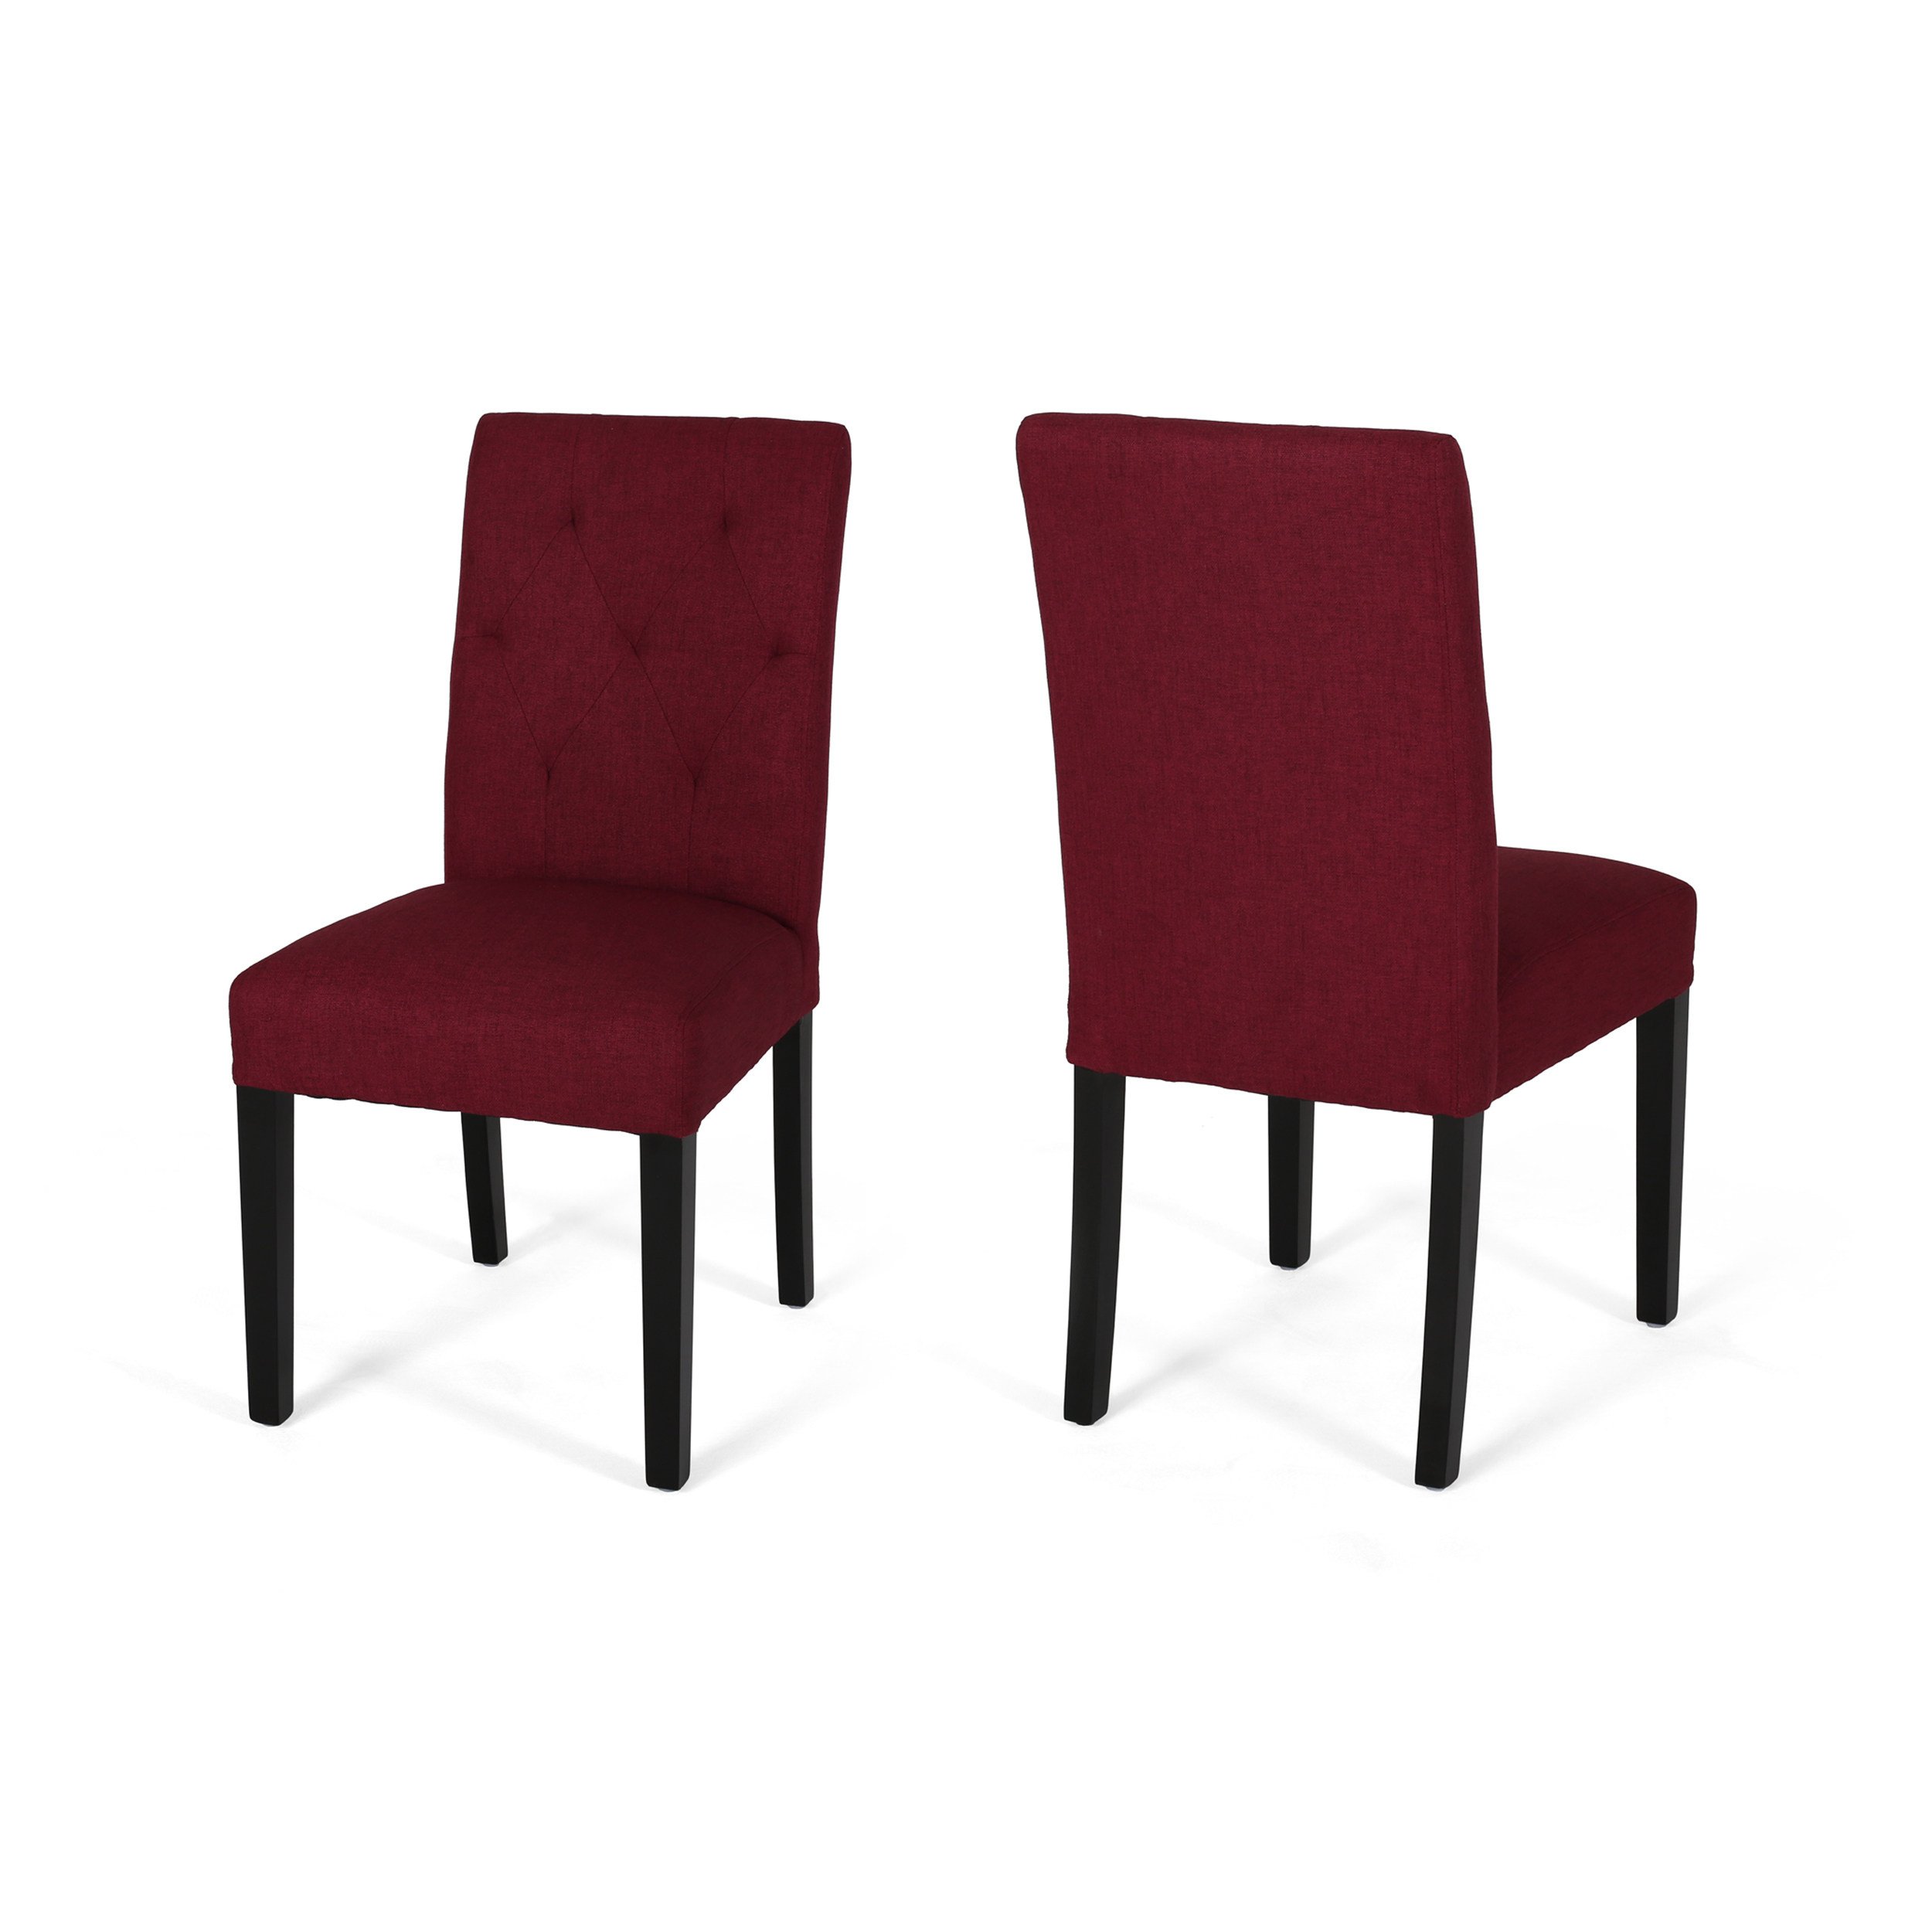 Waldon Tufted Dining Chairs (set Of 2) - Deep Red, Fabric